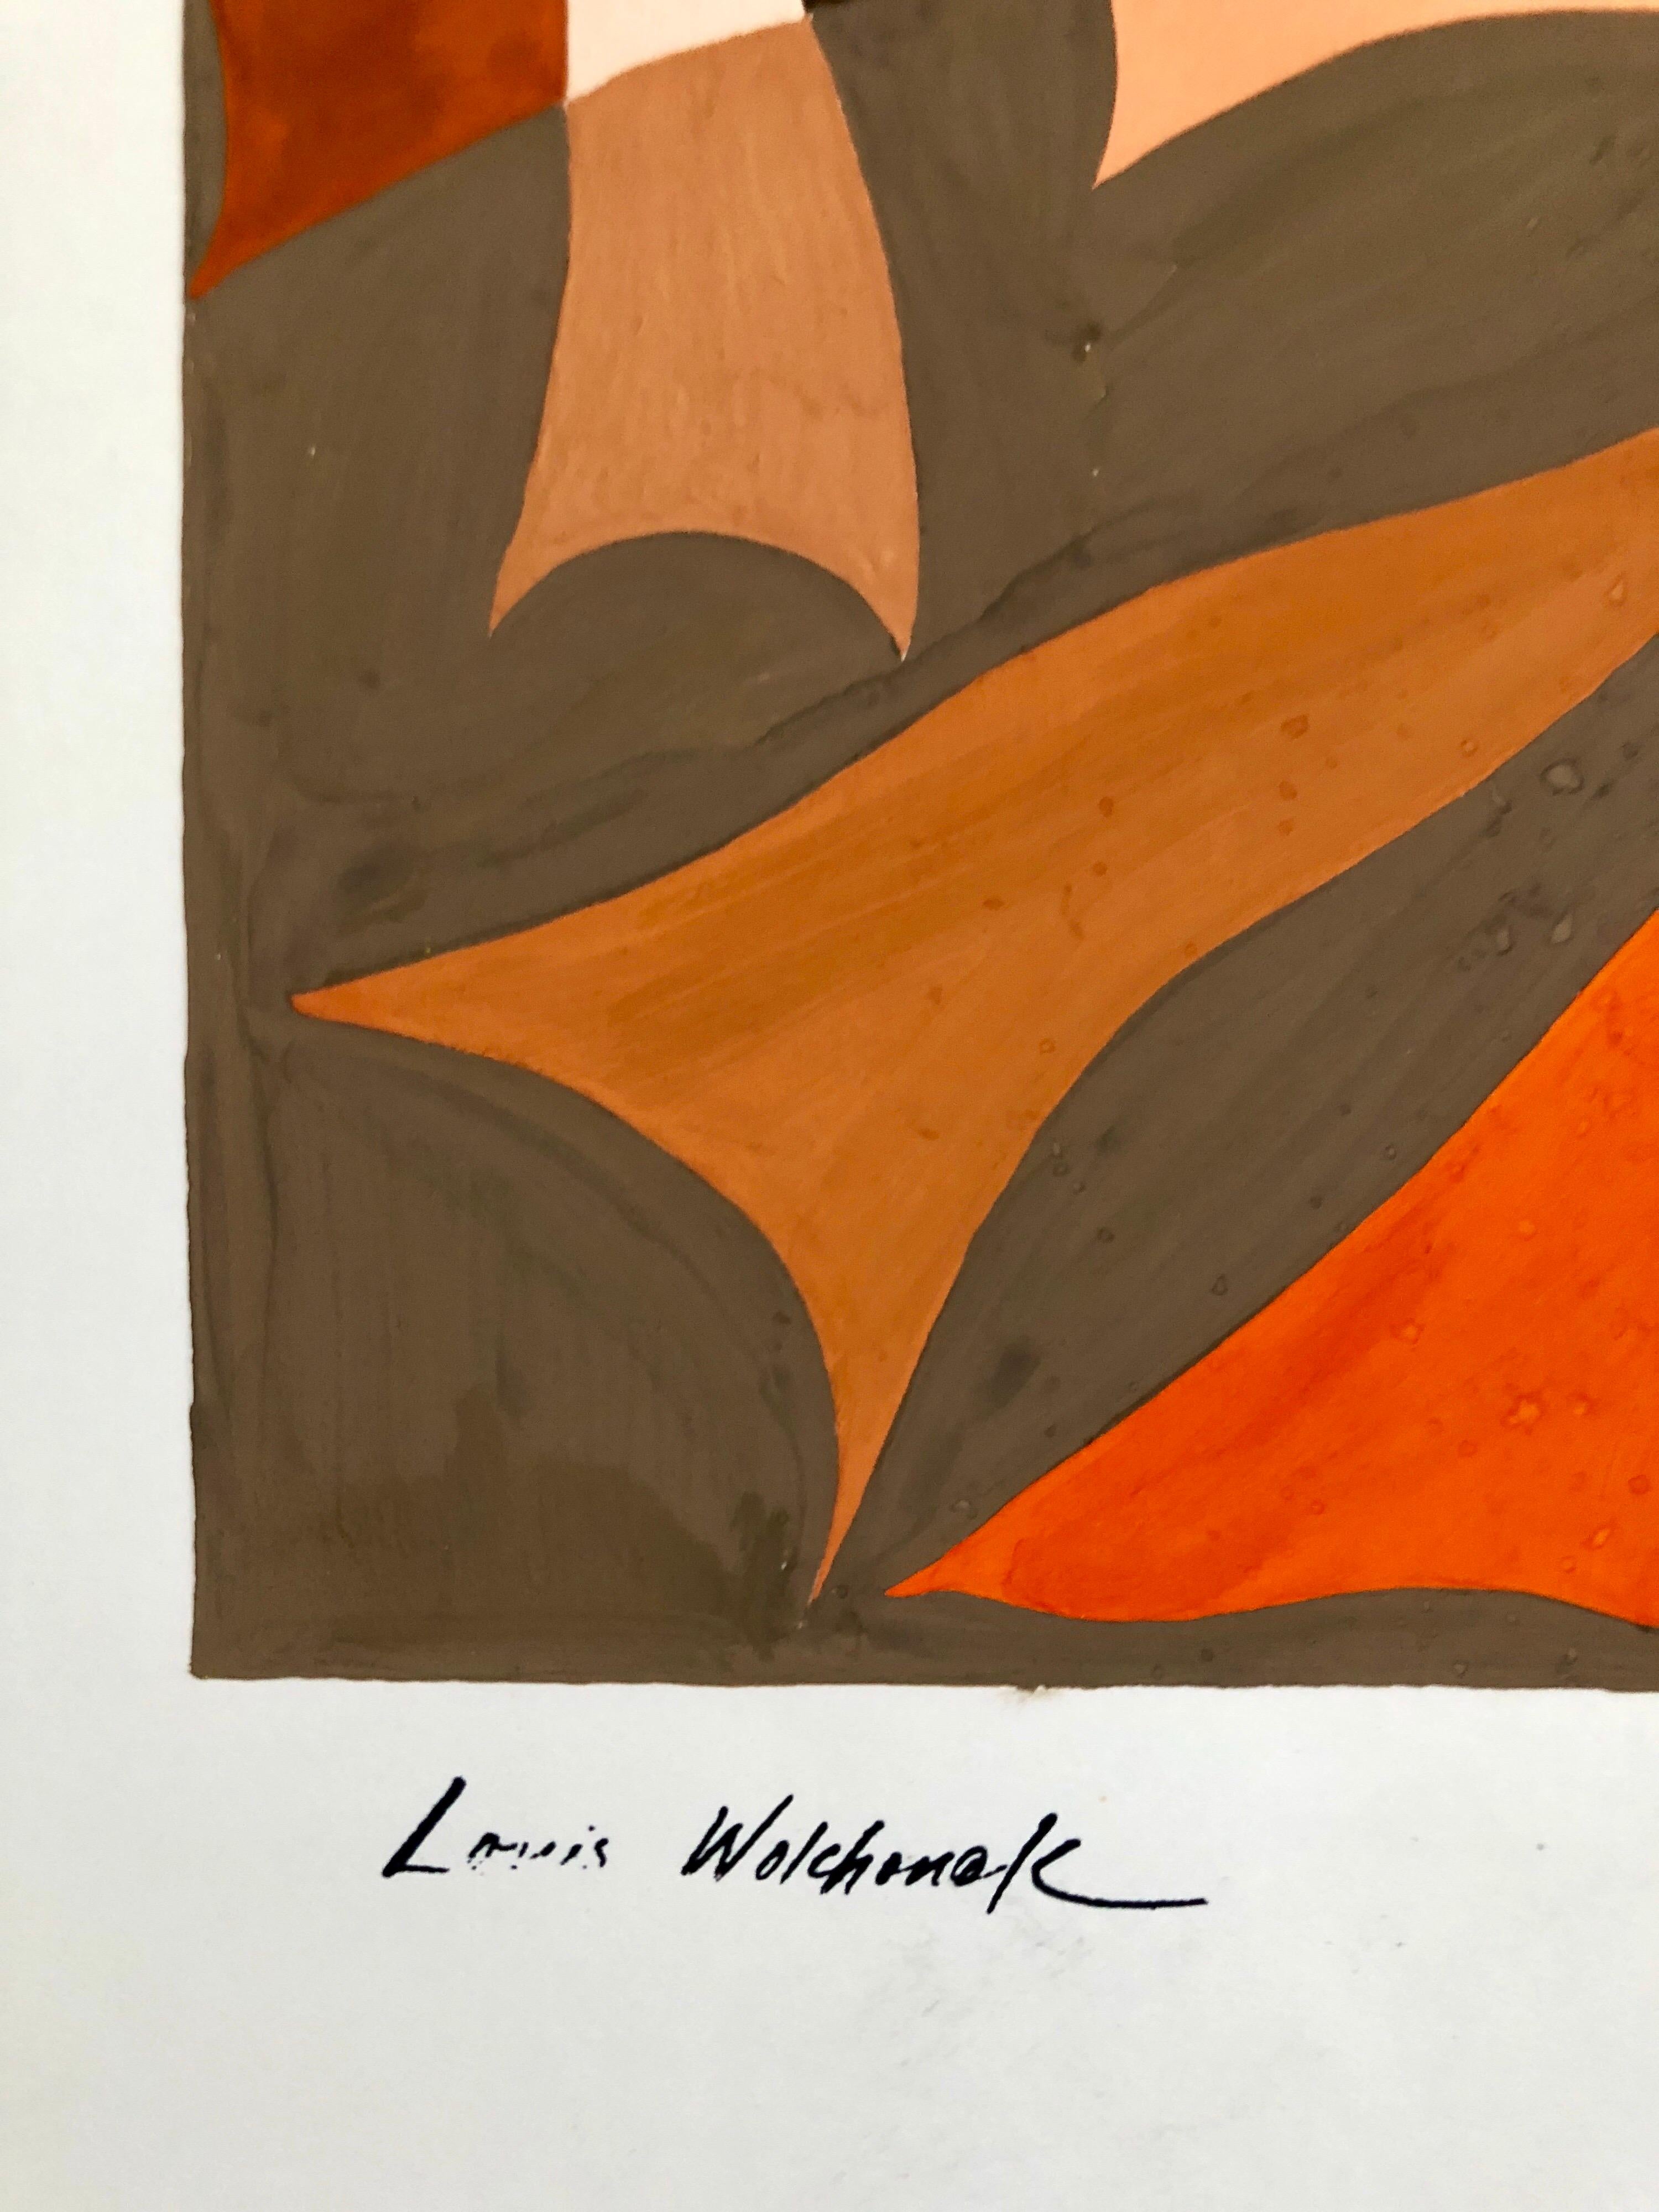 Louis Wolchonok was a social realist painter and member of the Woodstock Art Association. His work was exhibited at the Whitney Museum of American Art, the National Academy of Design and the Philadelphia Academy of Fine Art. This is gouache or oil